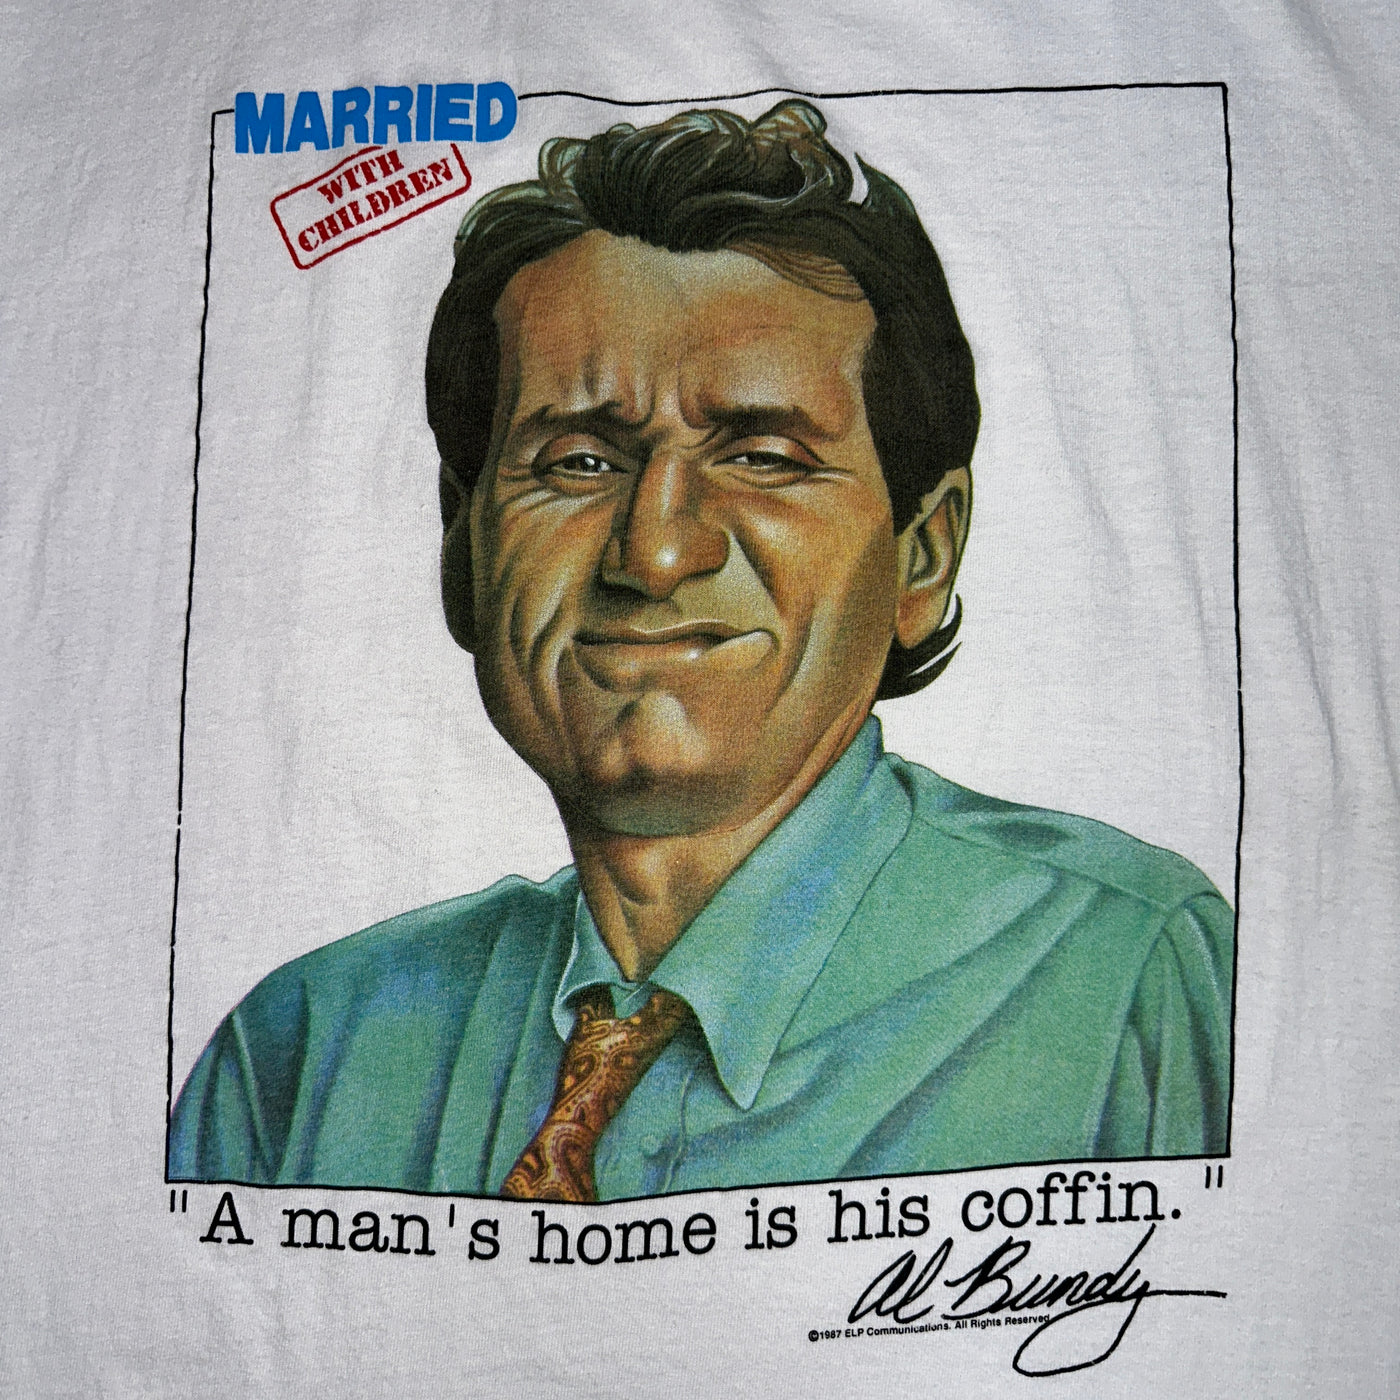 '87 Married With Children "A mans home is His Coffin" T-shirt sz L